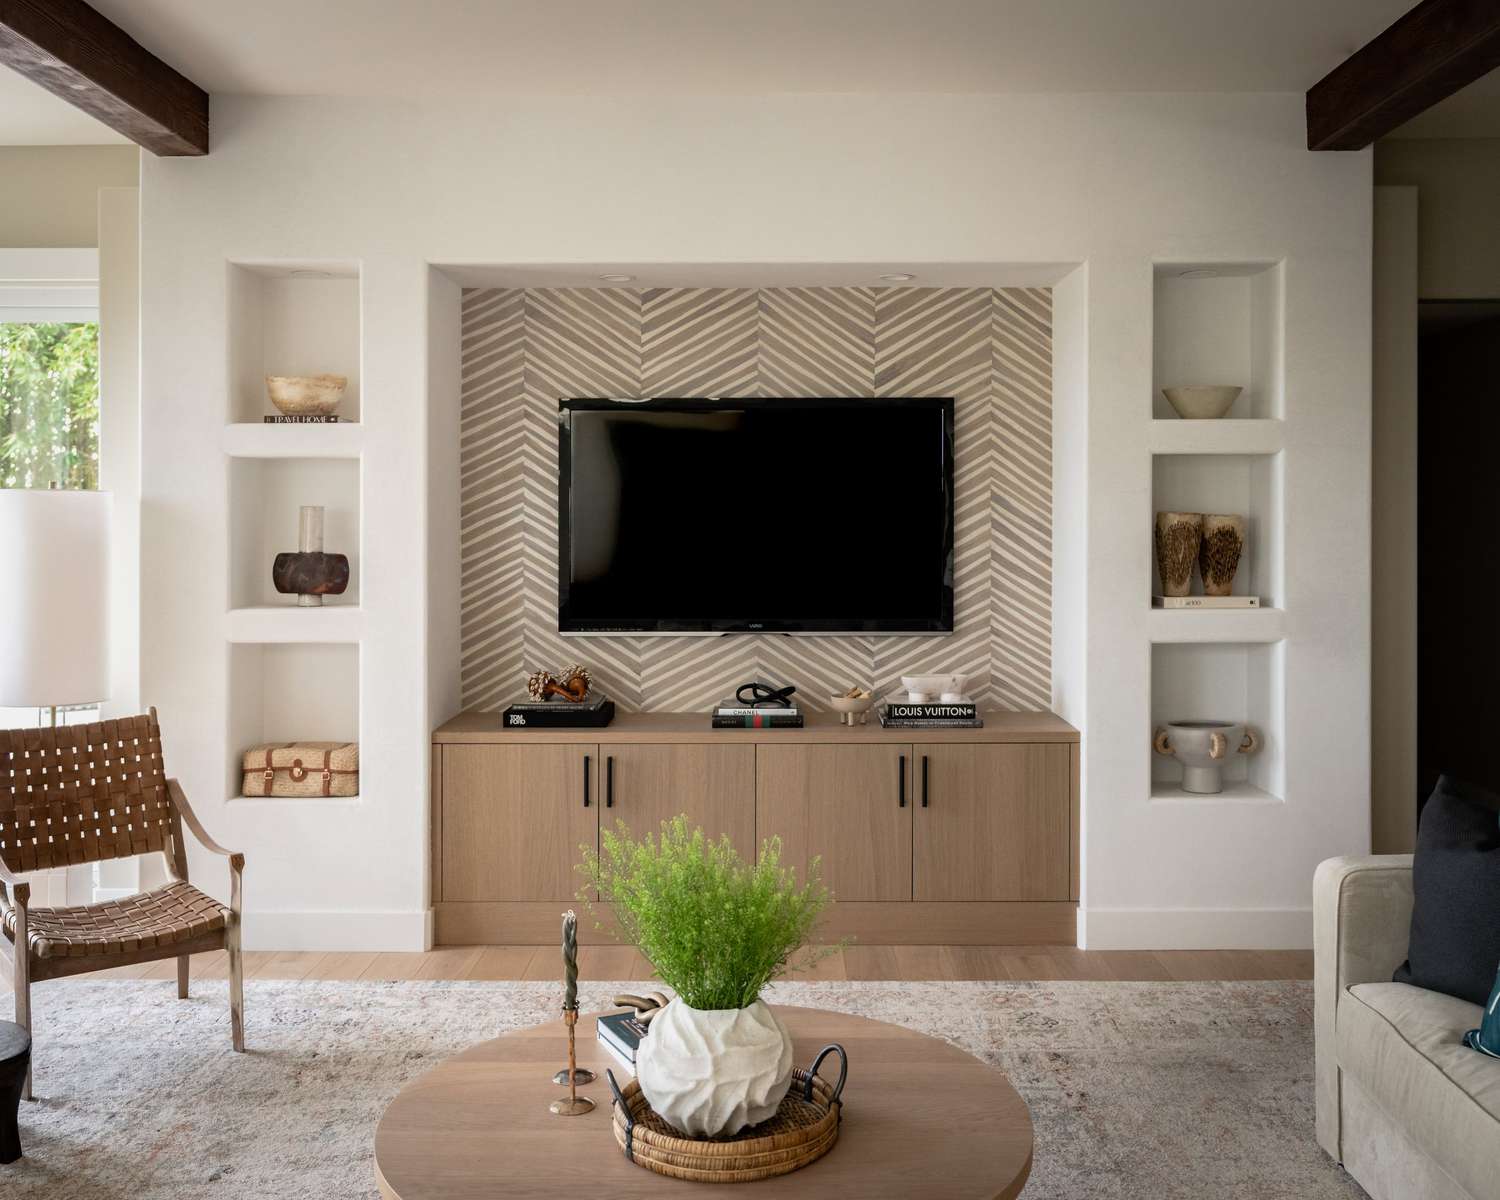 Where Should A TV Be Placed In A Living Room